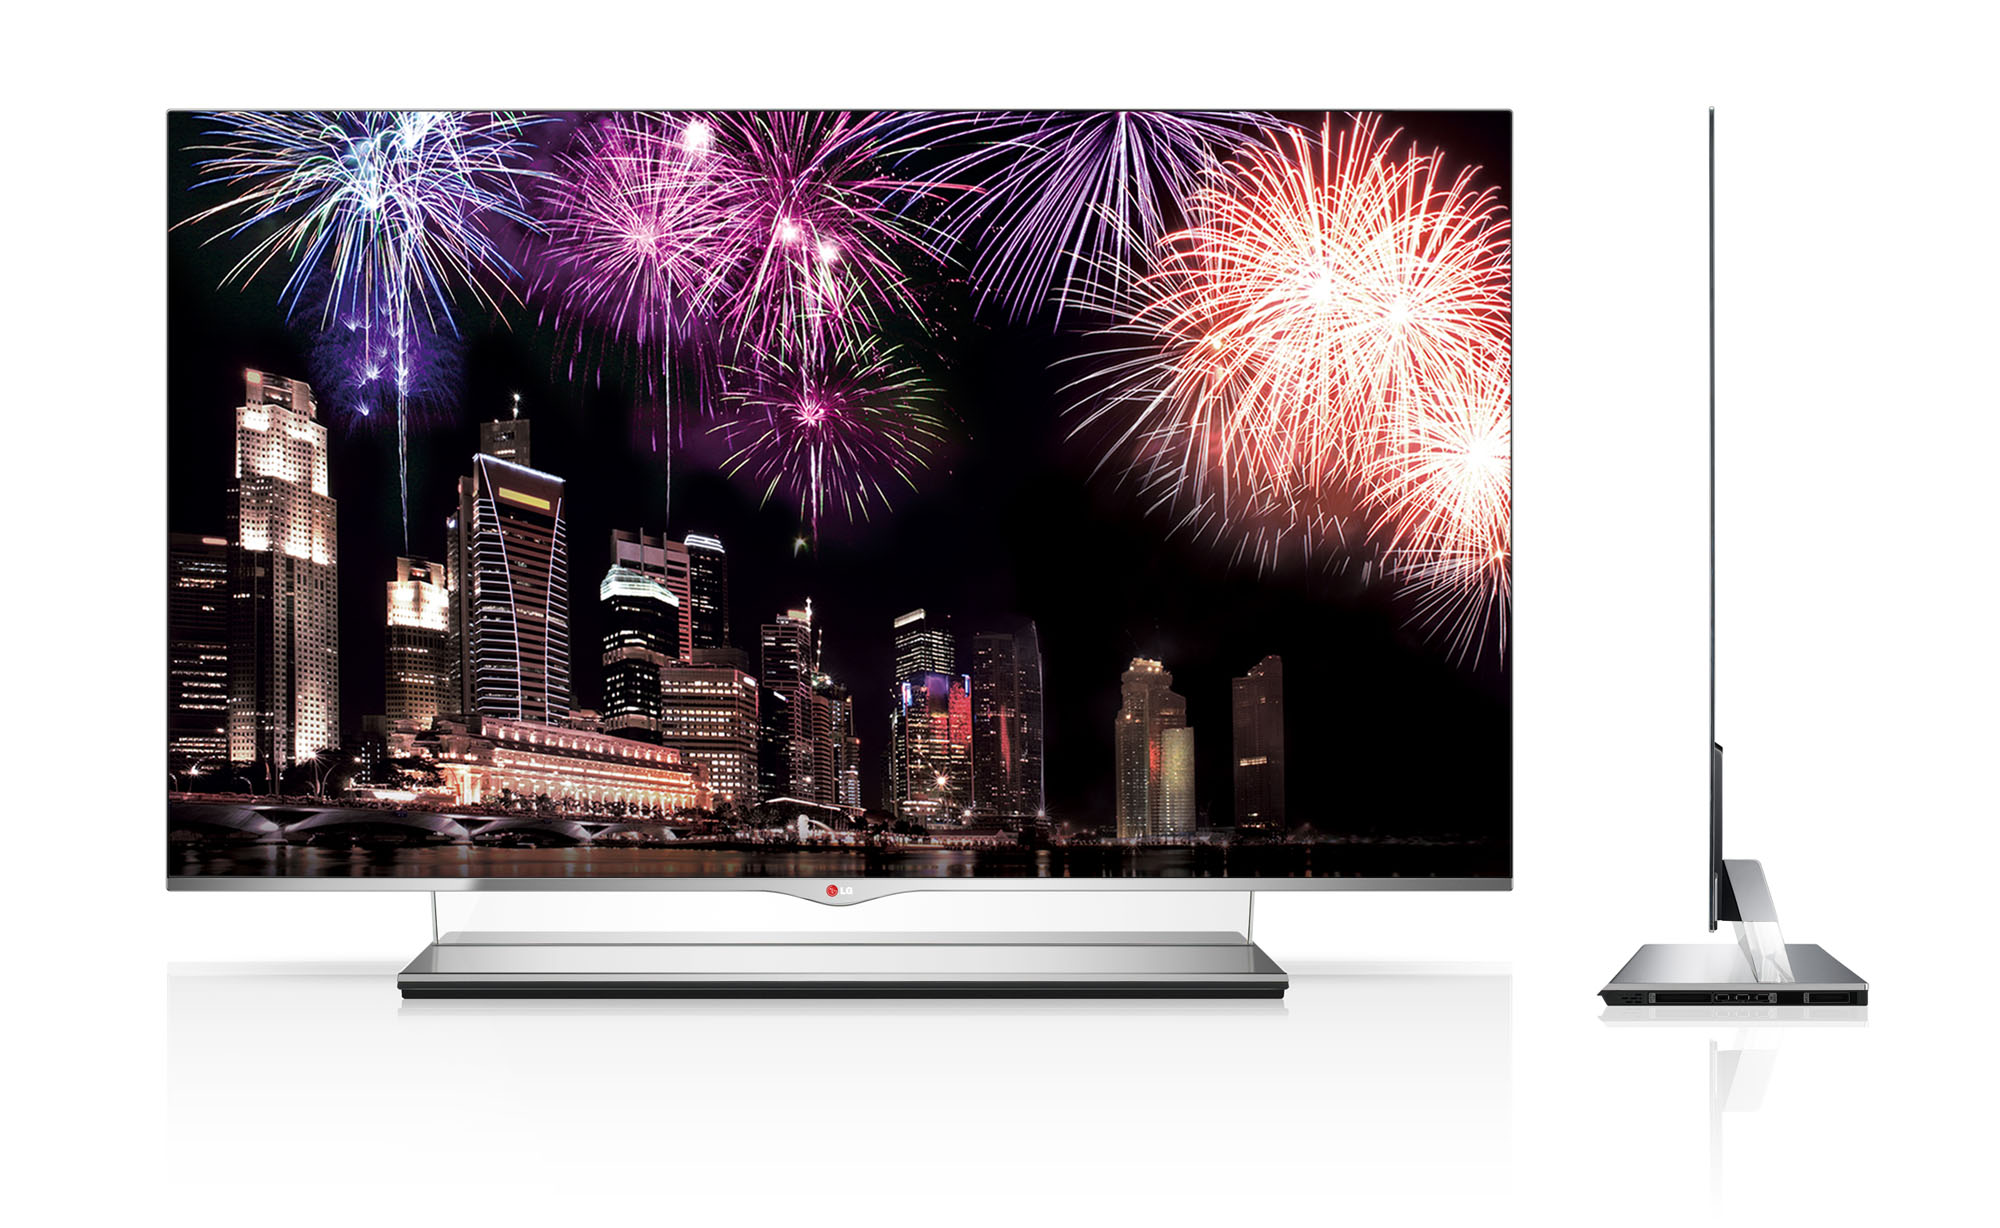 LG BEGINS ROLLOUT OF EAGERLY ANTICIPATED OLED TV LG Newsroom